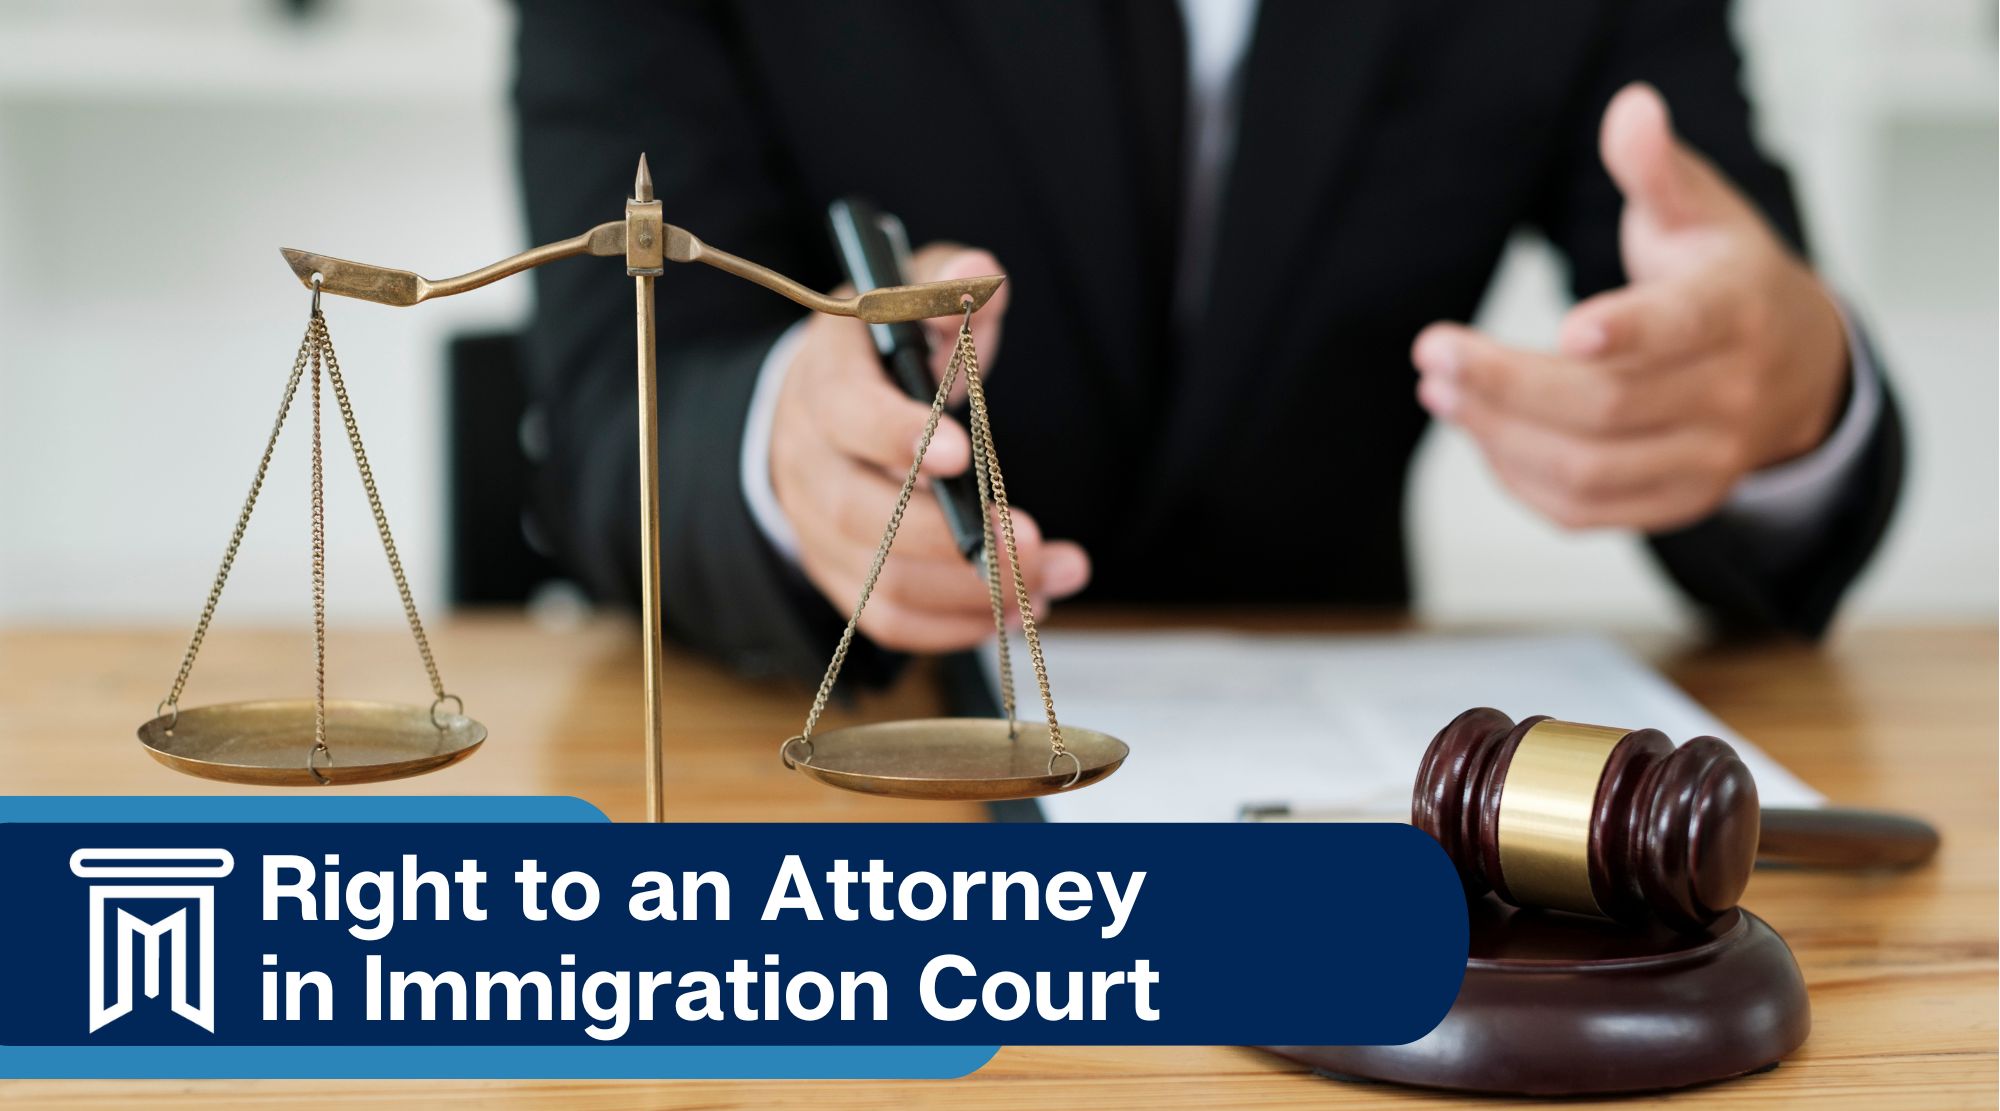 Right to an Attorney in Immigration Court